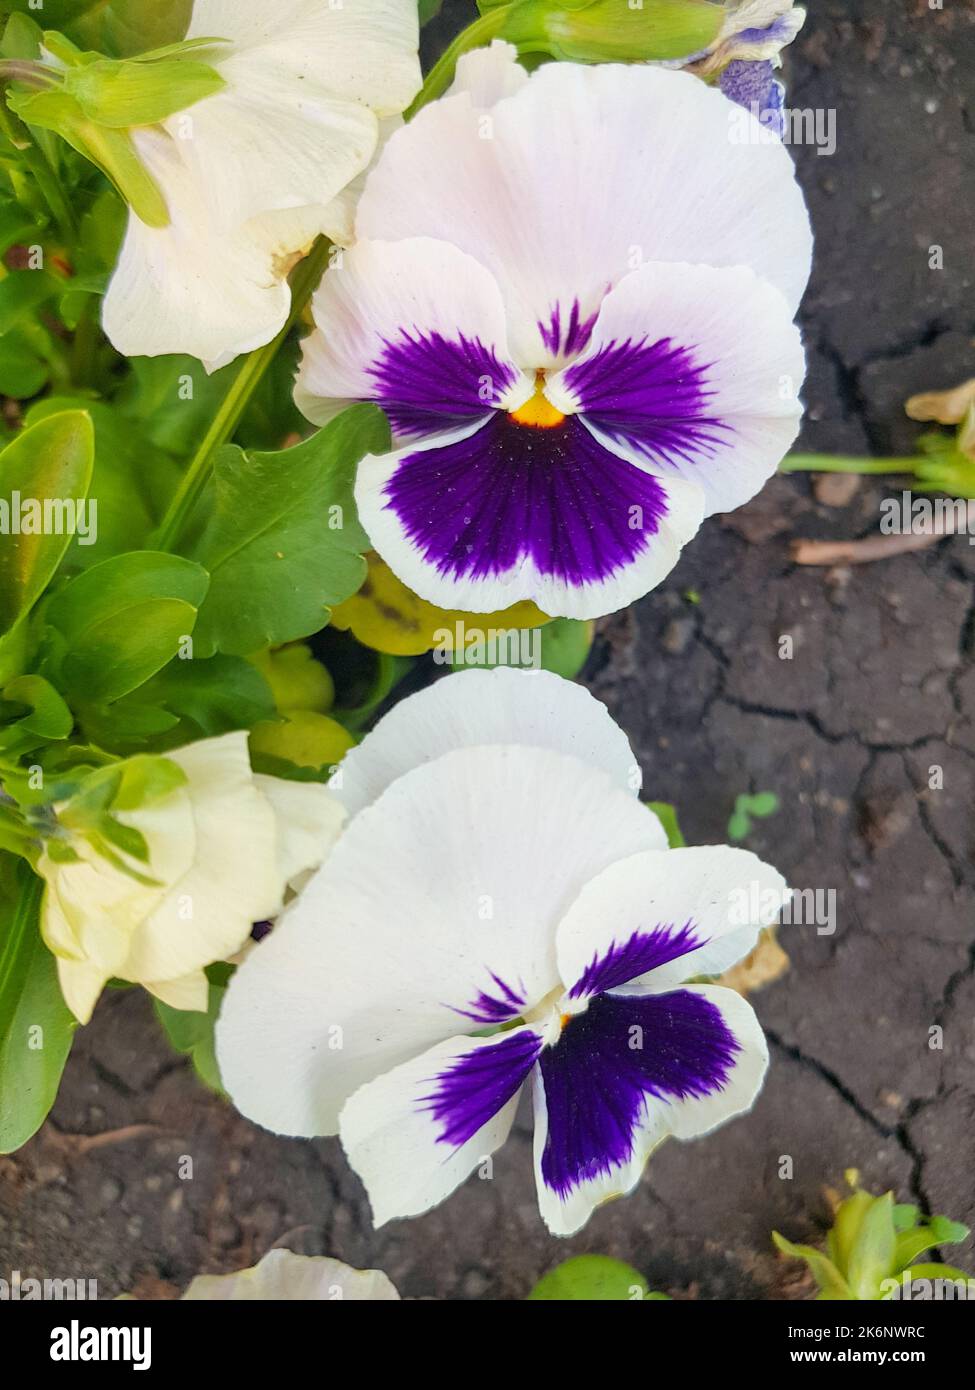 Garden pansies with purple and white petals. Viola tricolor pansies on a flower bed. Stock Photo